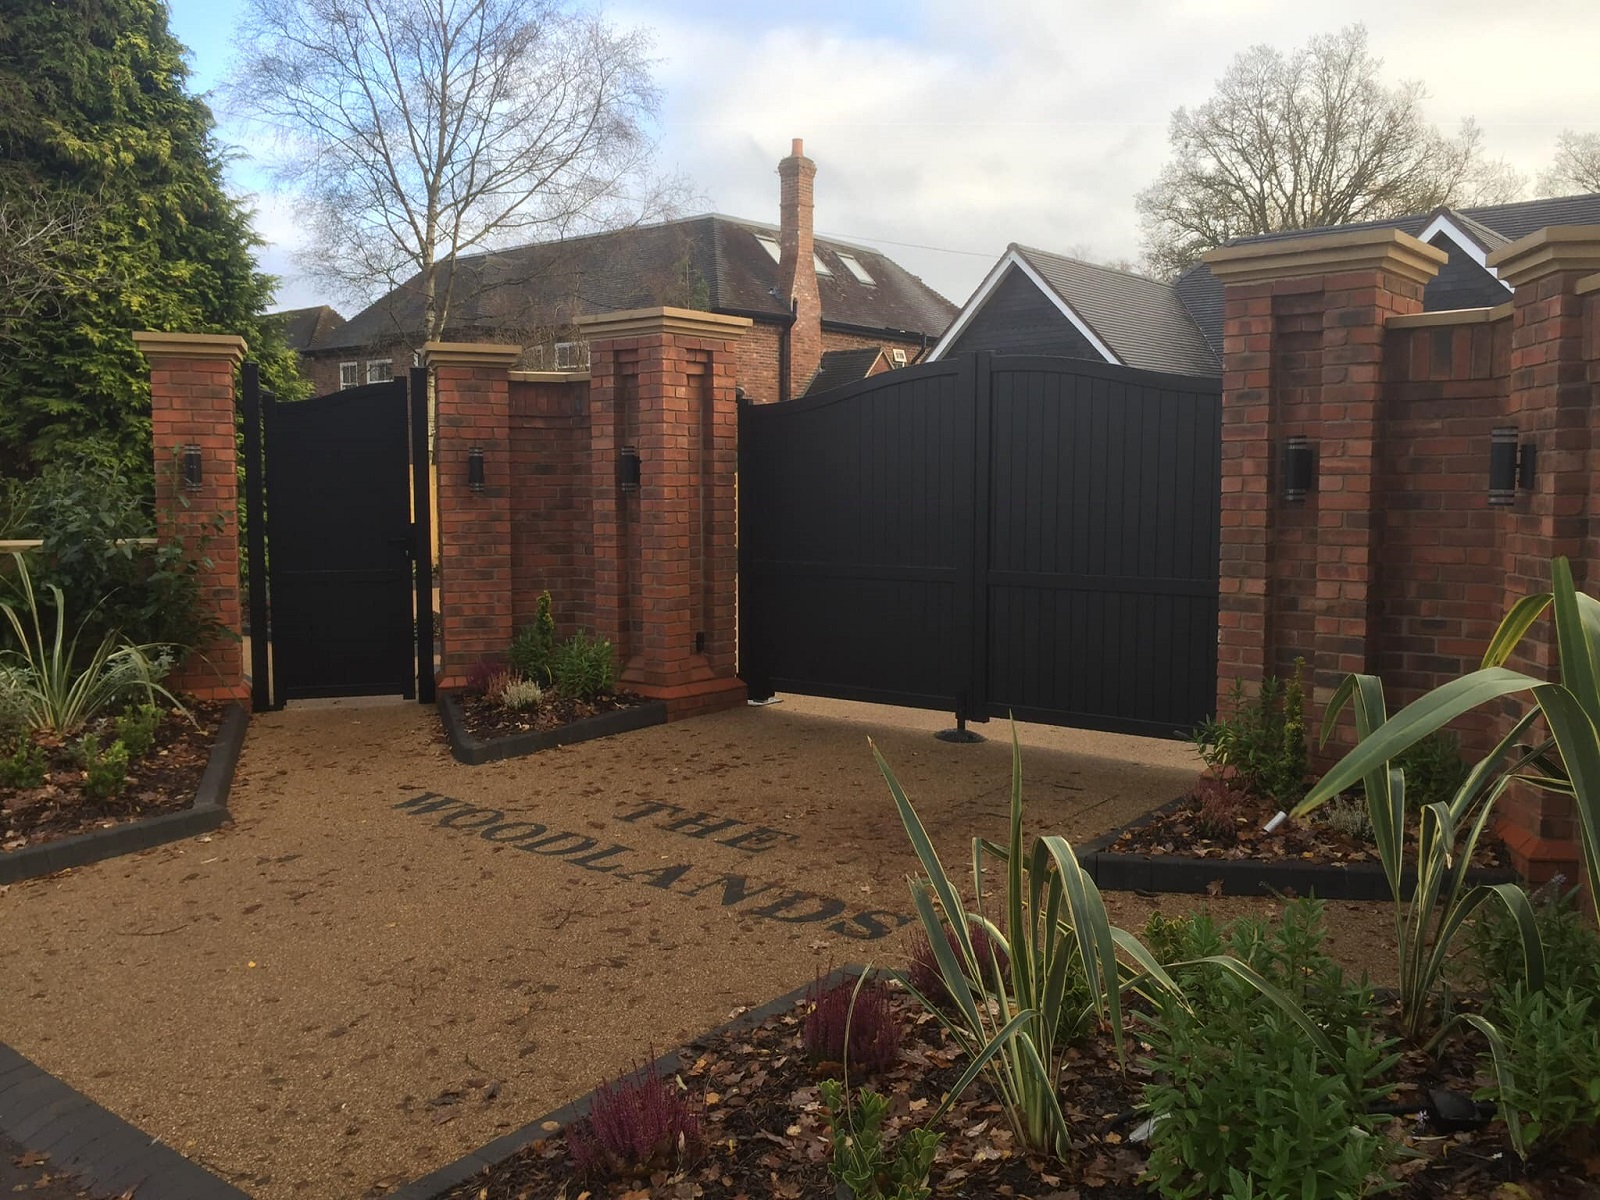 Aluminium arched driveway gates with a modern design